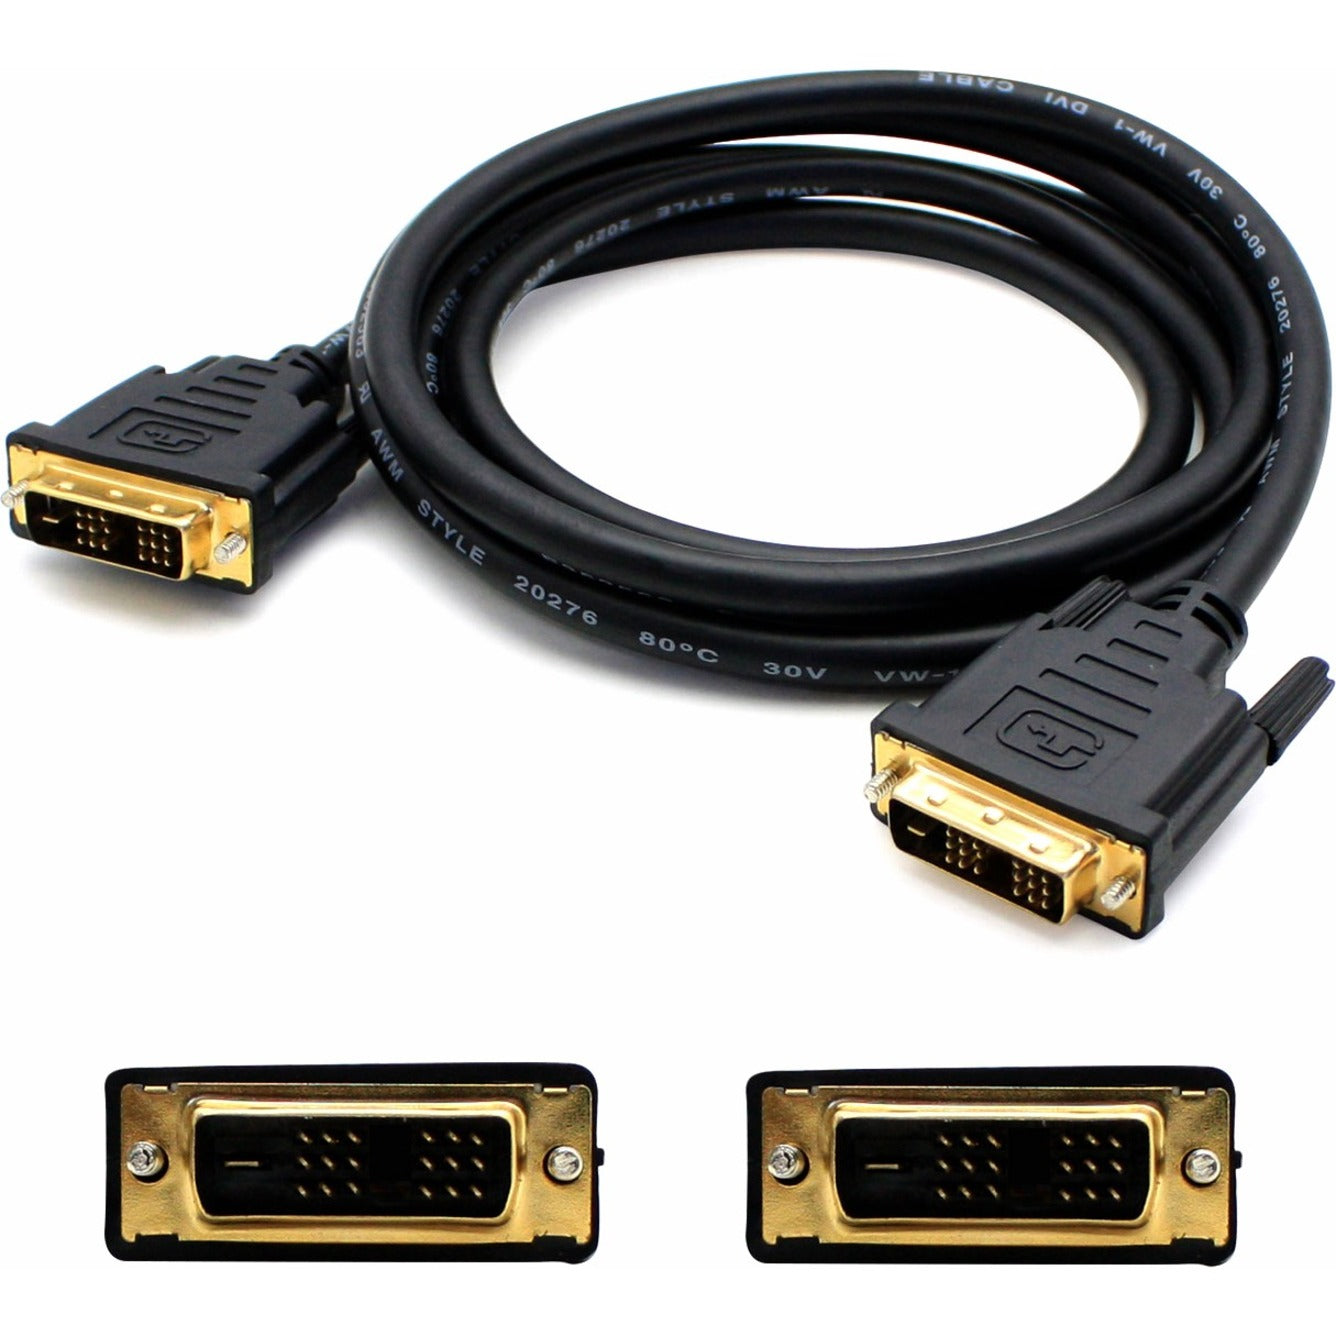 AddOn DVID2DVIDSL6F 6ft (1.8M) DVI-D to DVI-D Single Link Cable - Male to Male, Copper Conductor, 3 Year Warranty